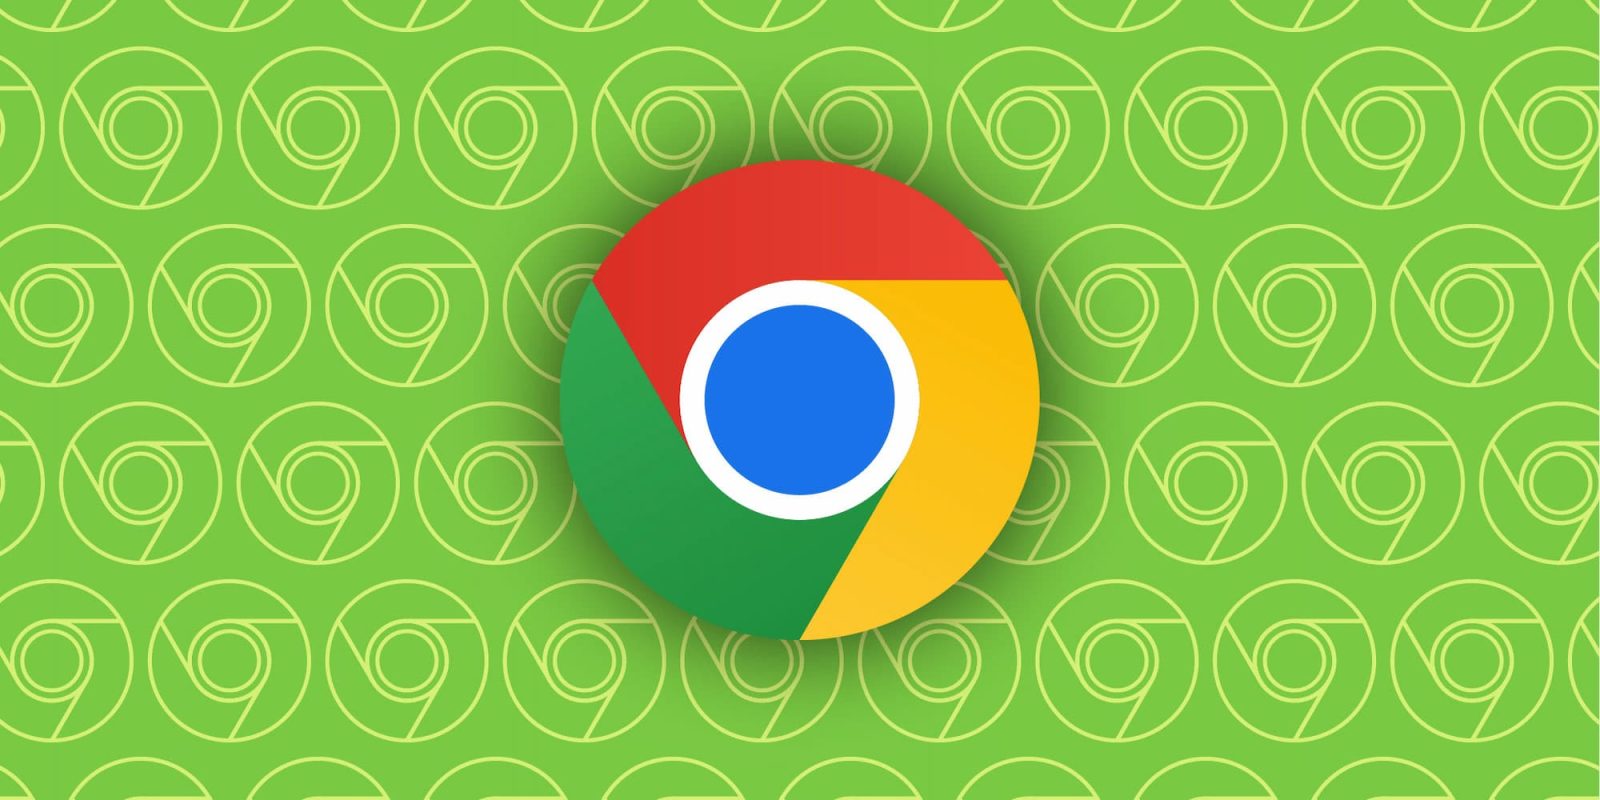 Chrome’s Omnibox address bar is now powered by machine learning